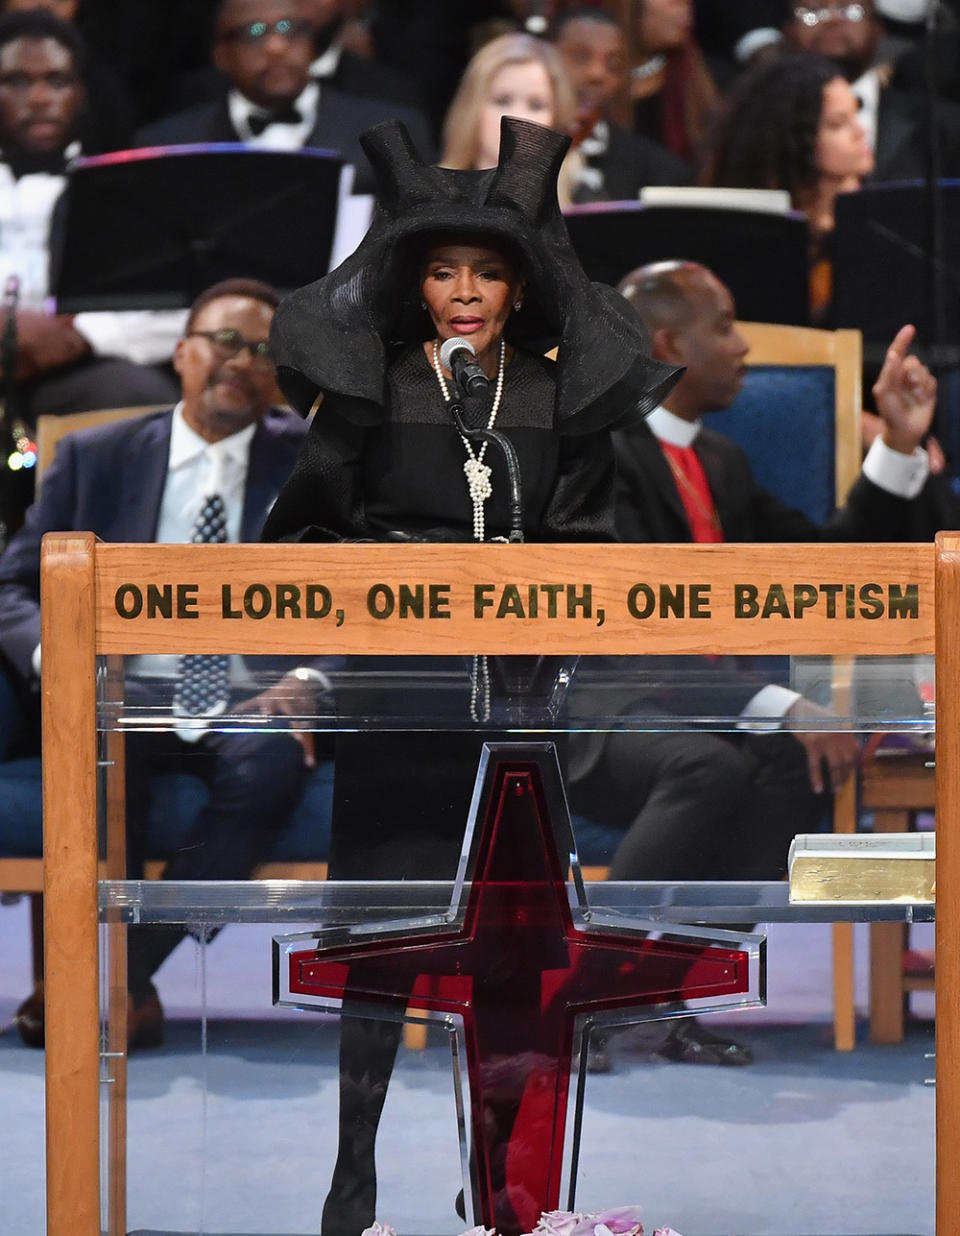 Cicely Tyson speaks at Aretha Franklin's funeral at Greater Grace Temple on August 31, 2018 in Detroit, Michigan.